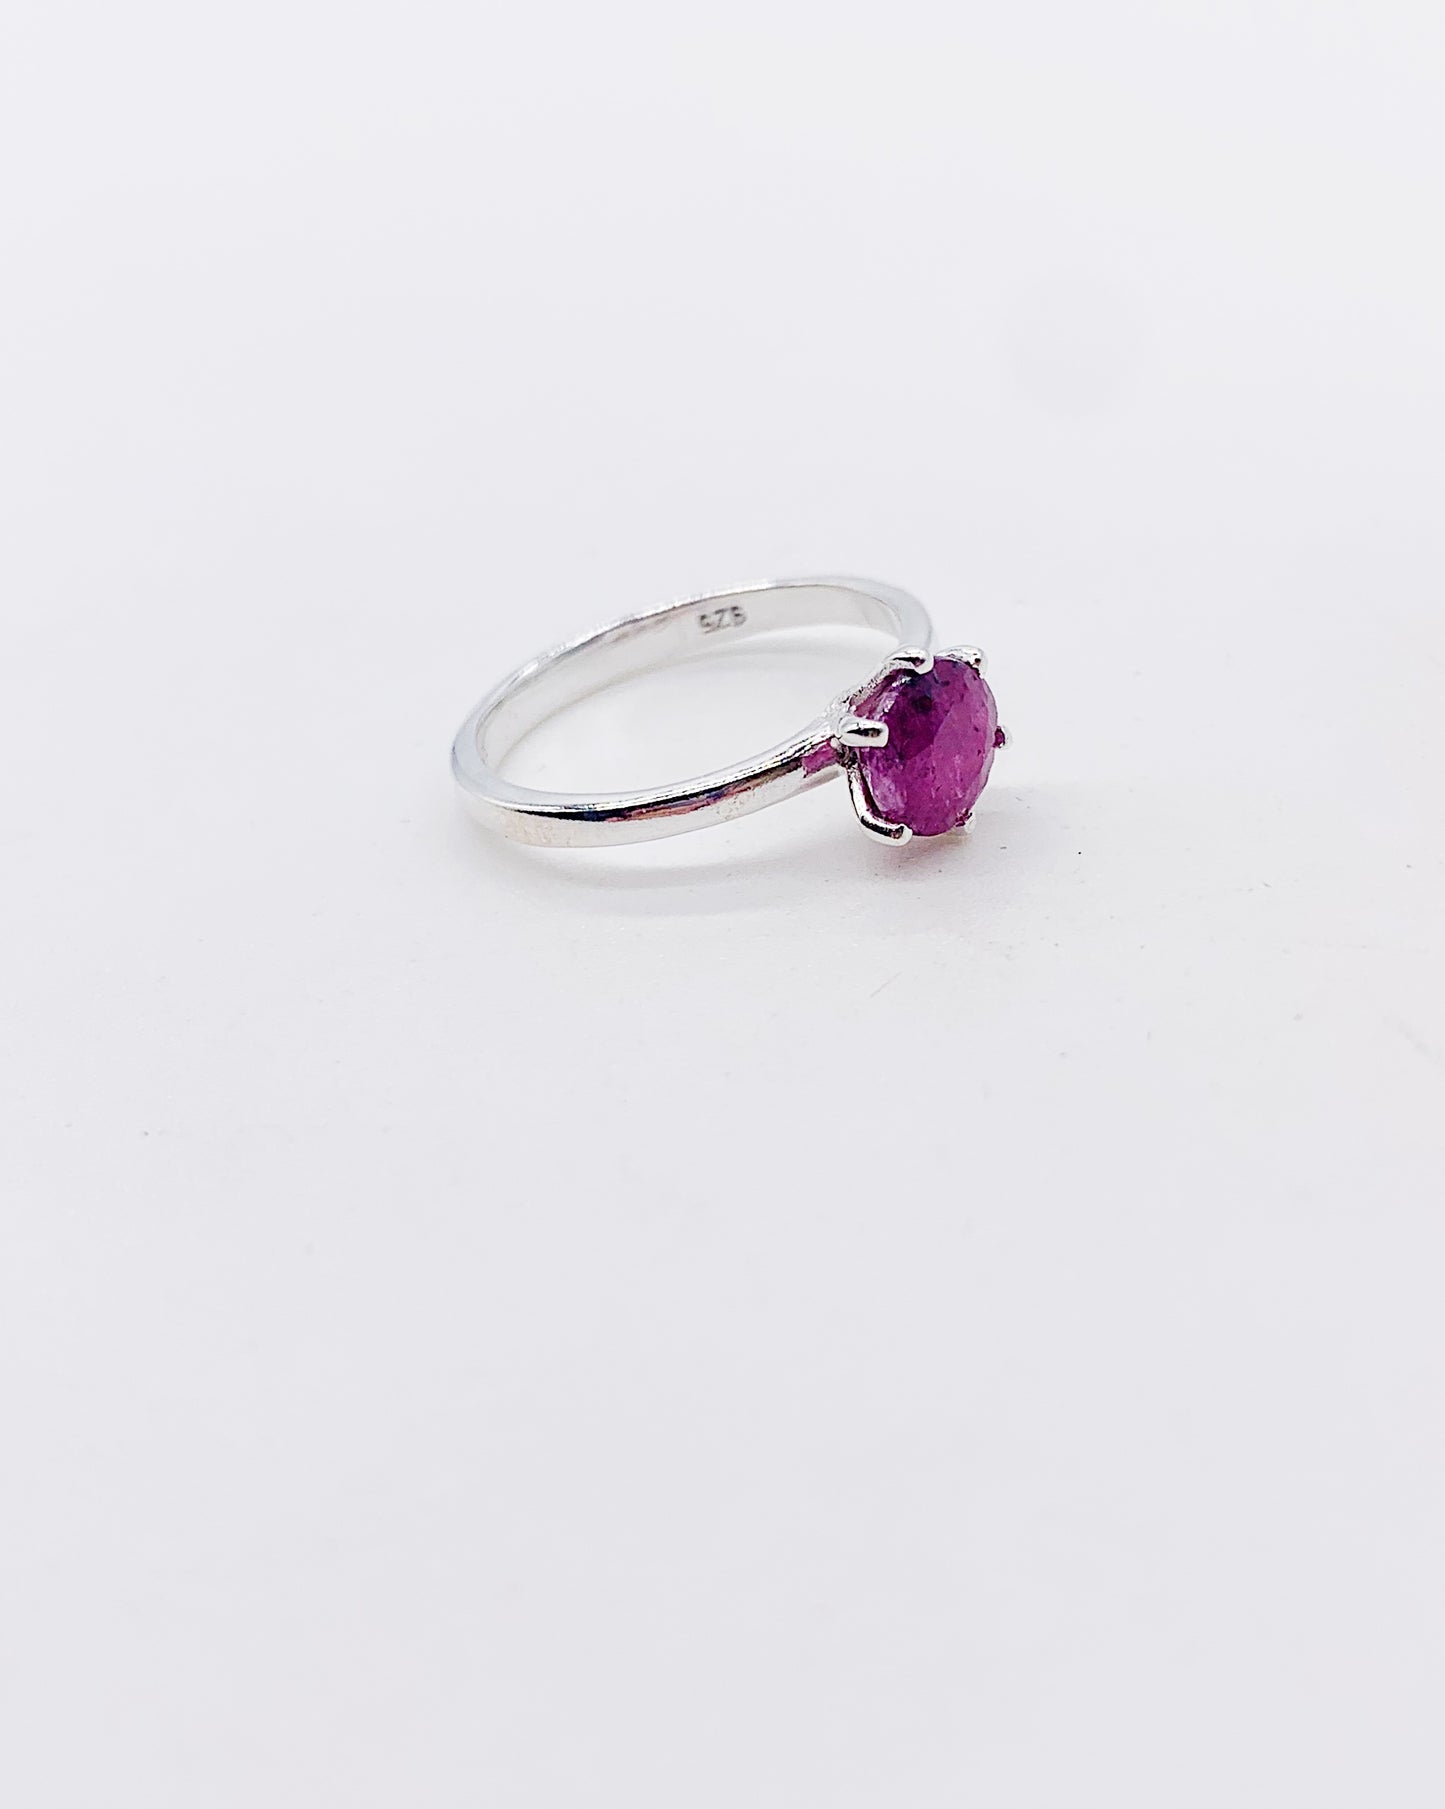 RUBY SOLITAIRE RING